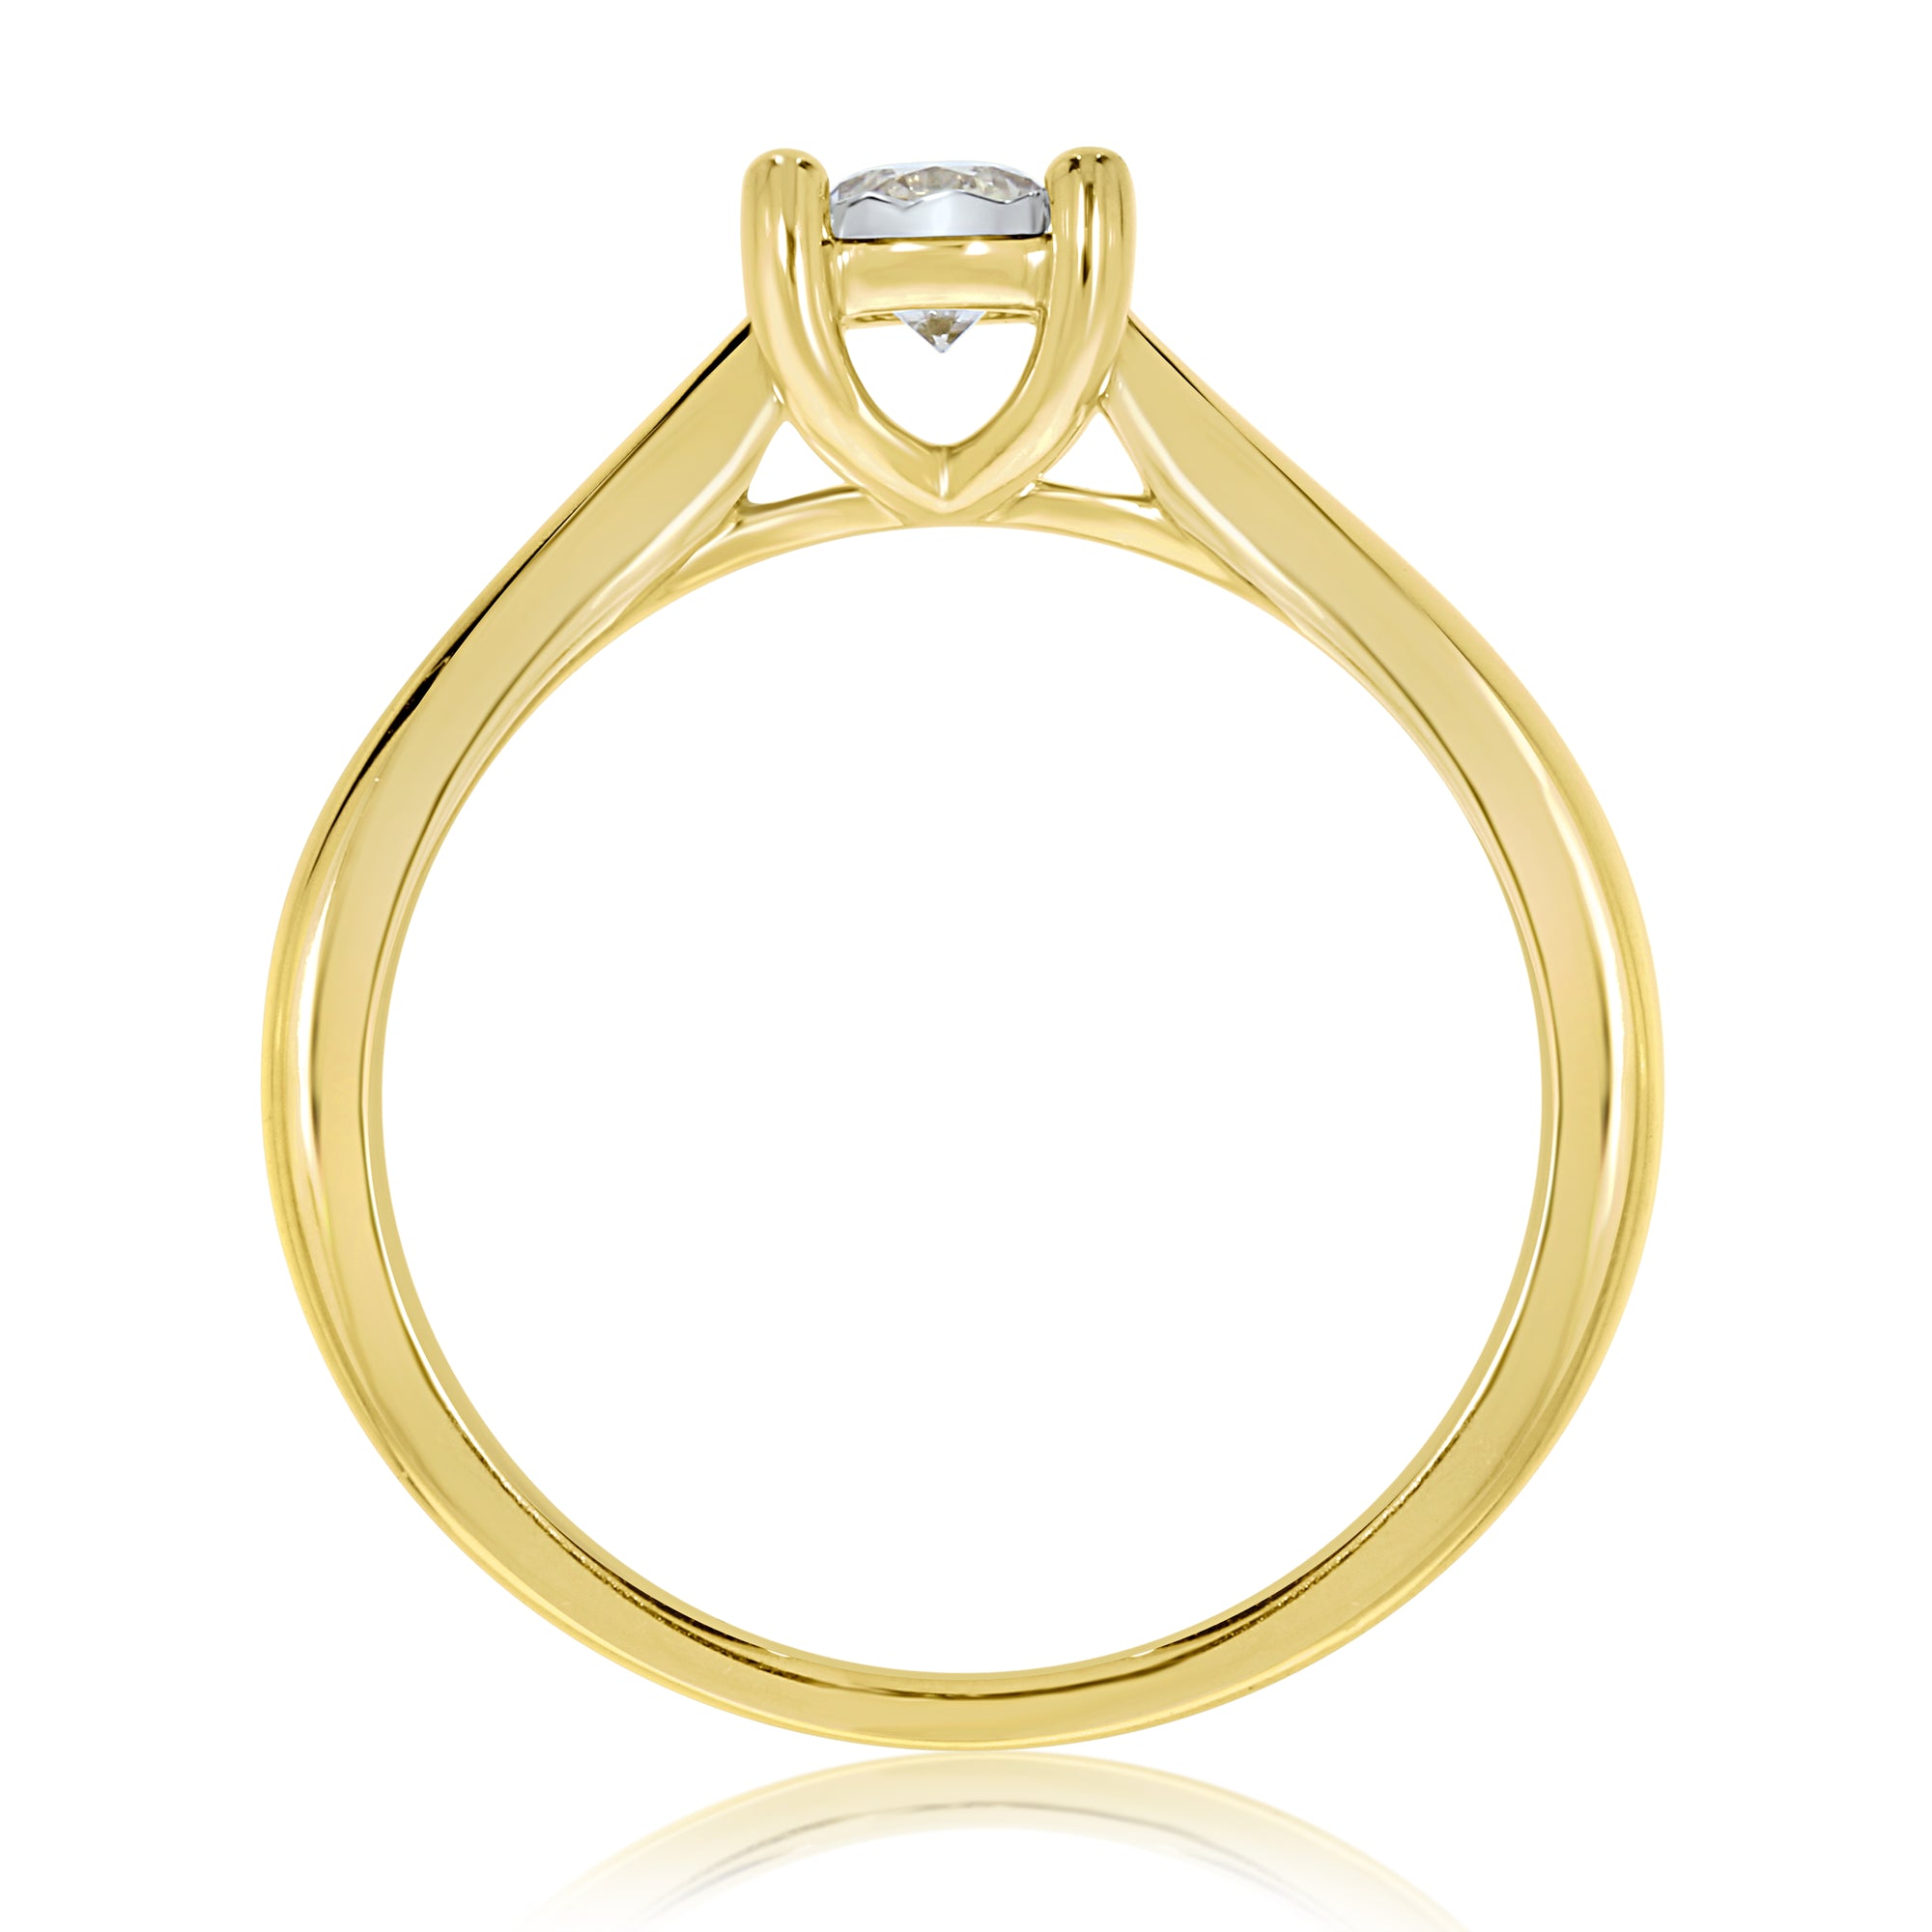 9ct gold single stone miracle plate diamond ring 0.33ct